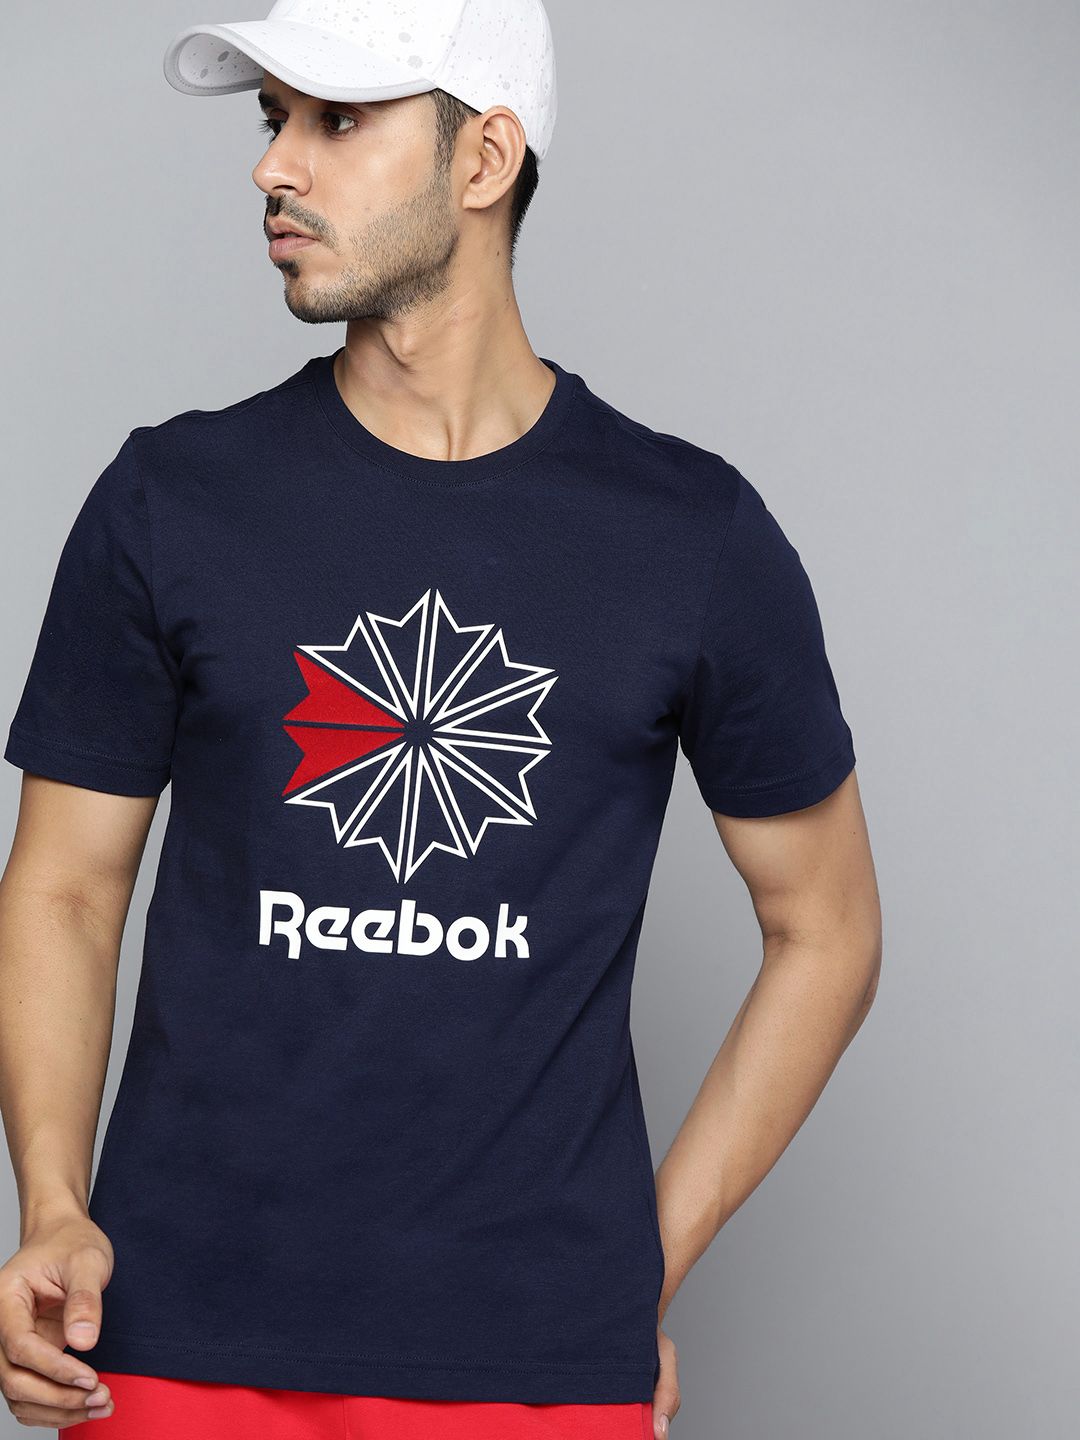 Reebok Classic Unisex Navy Blue & White Pure Cotton Brand Logo Printed T-shirt Price in India